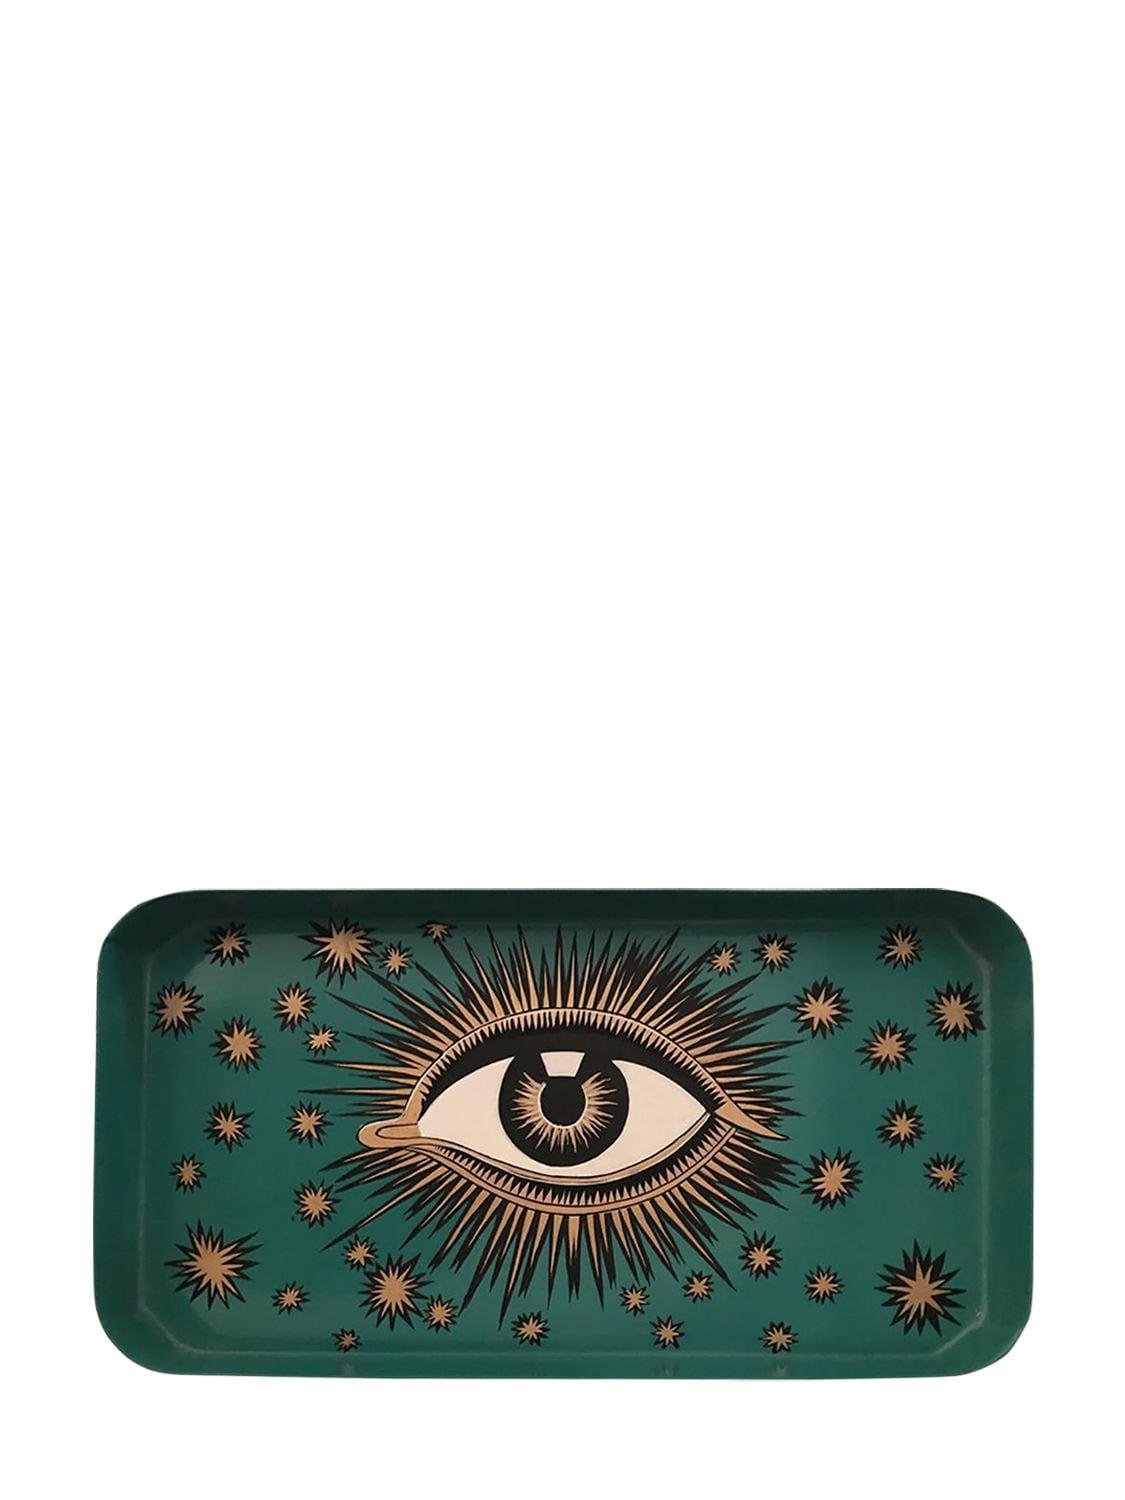 Eye Hand-painted Iron Tray by LES OTTOMANS